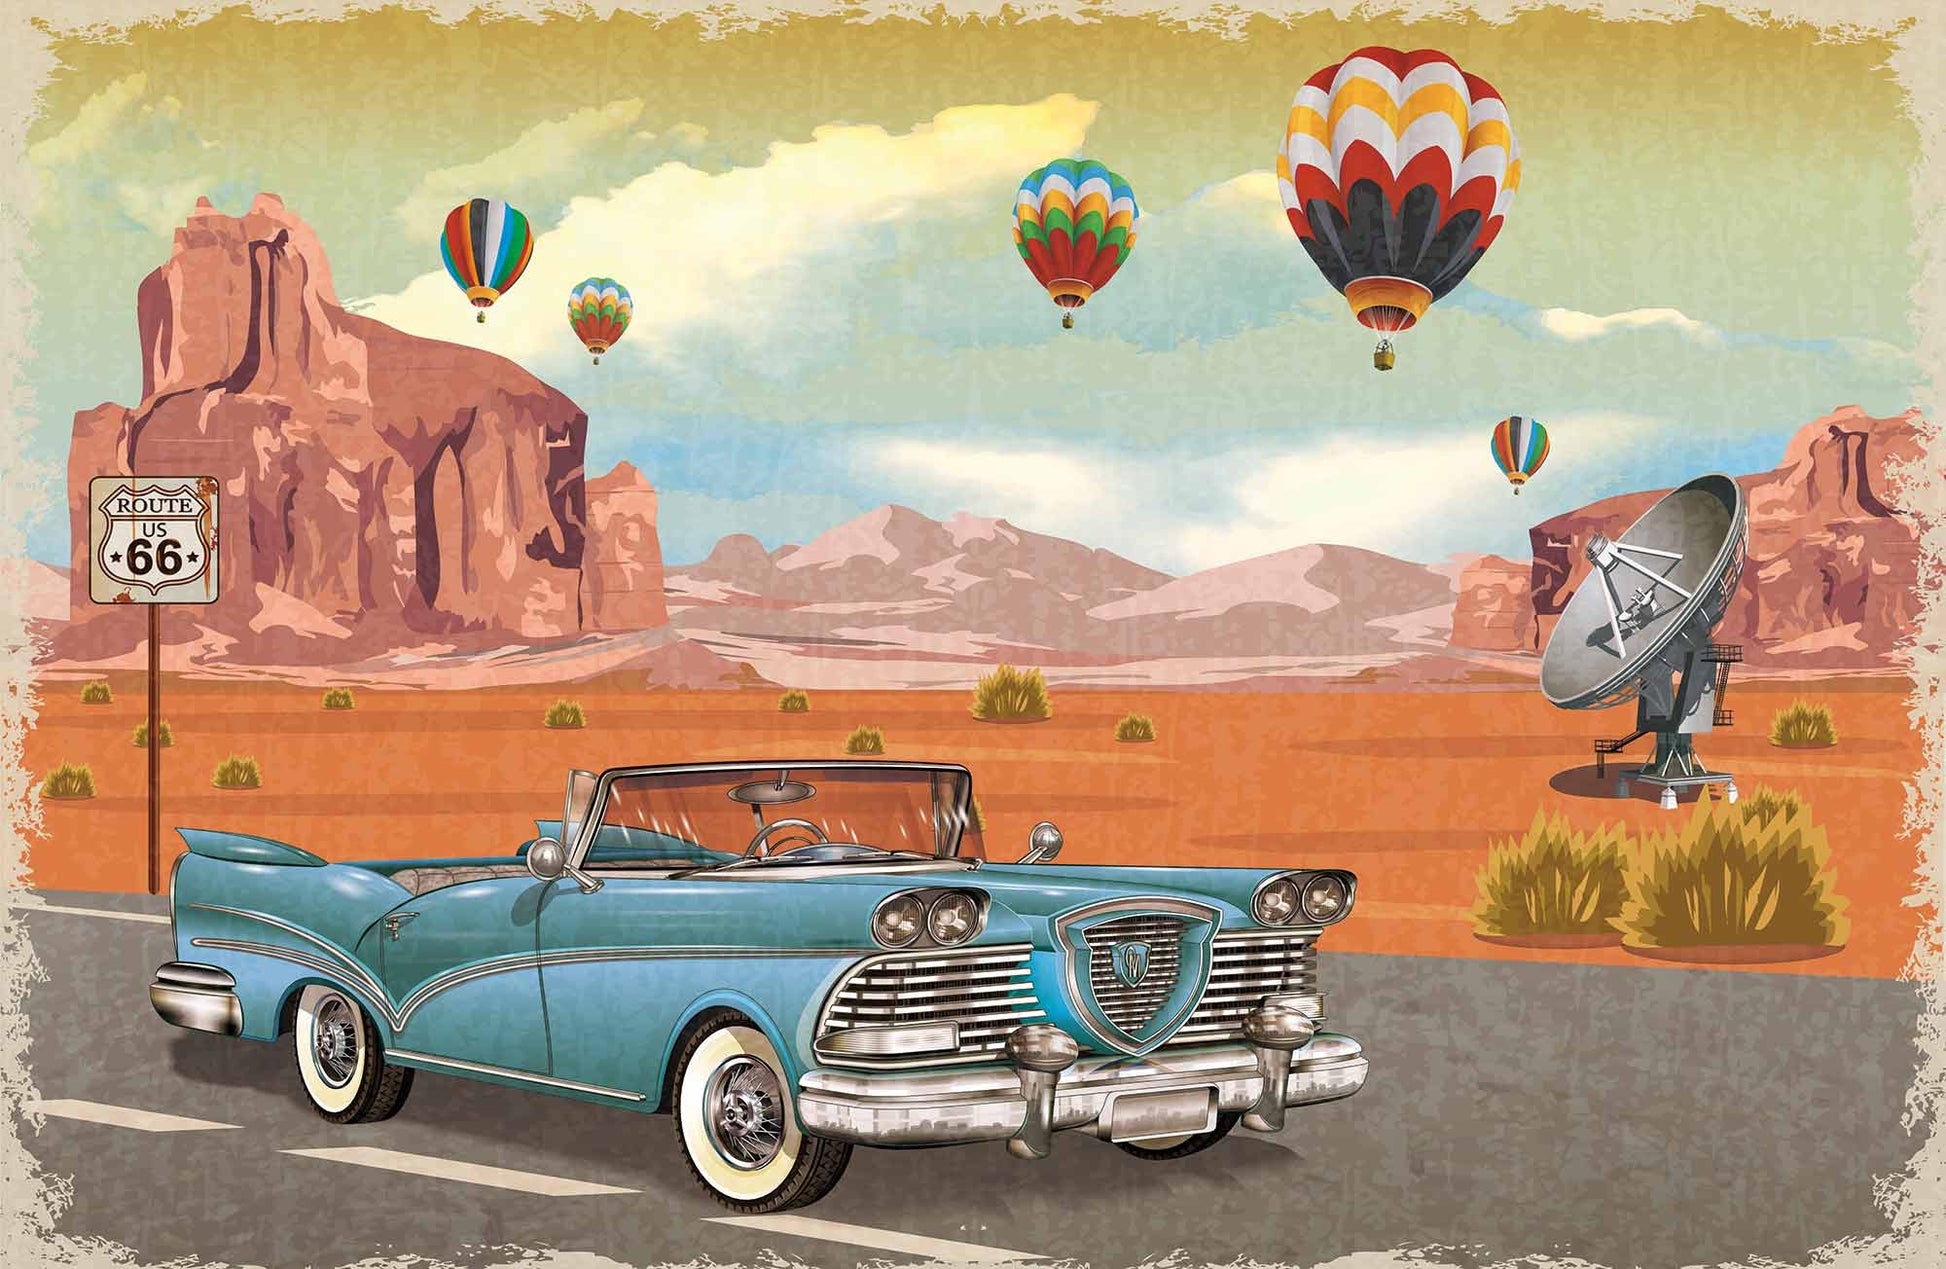 a wallpaper mural featuring automobiles on a road trip, perfect for decorating your house.